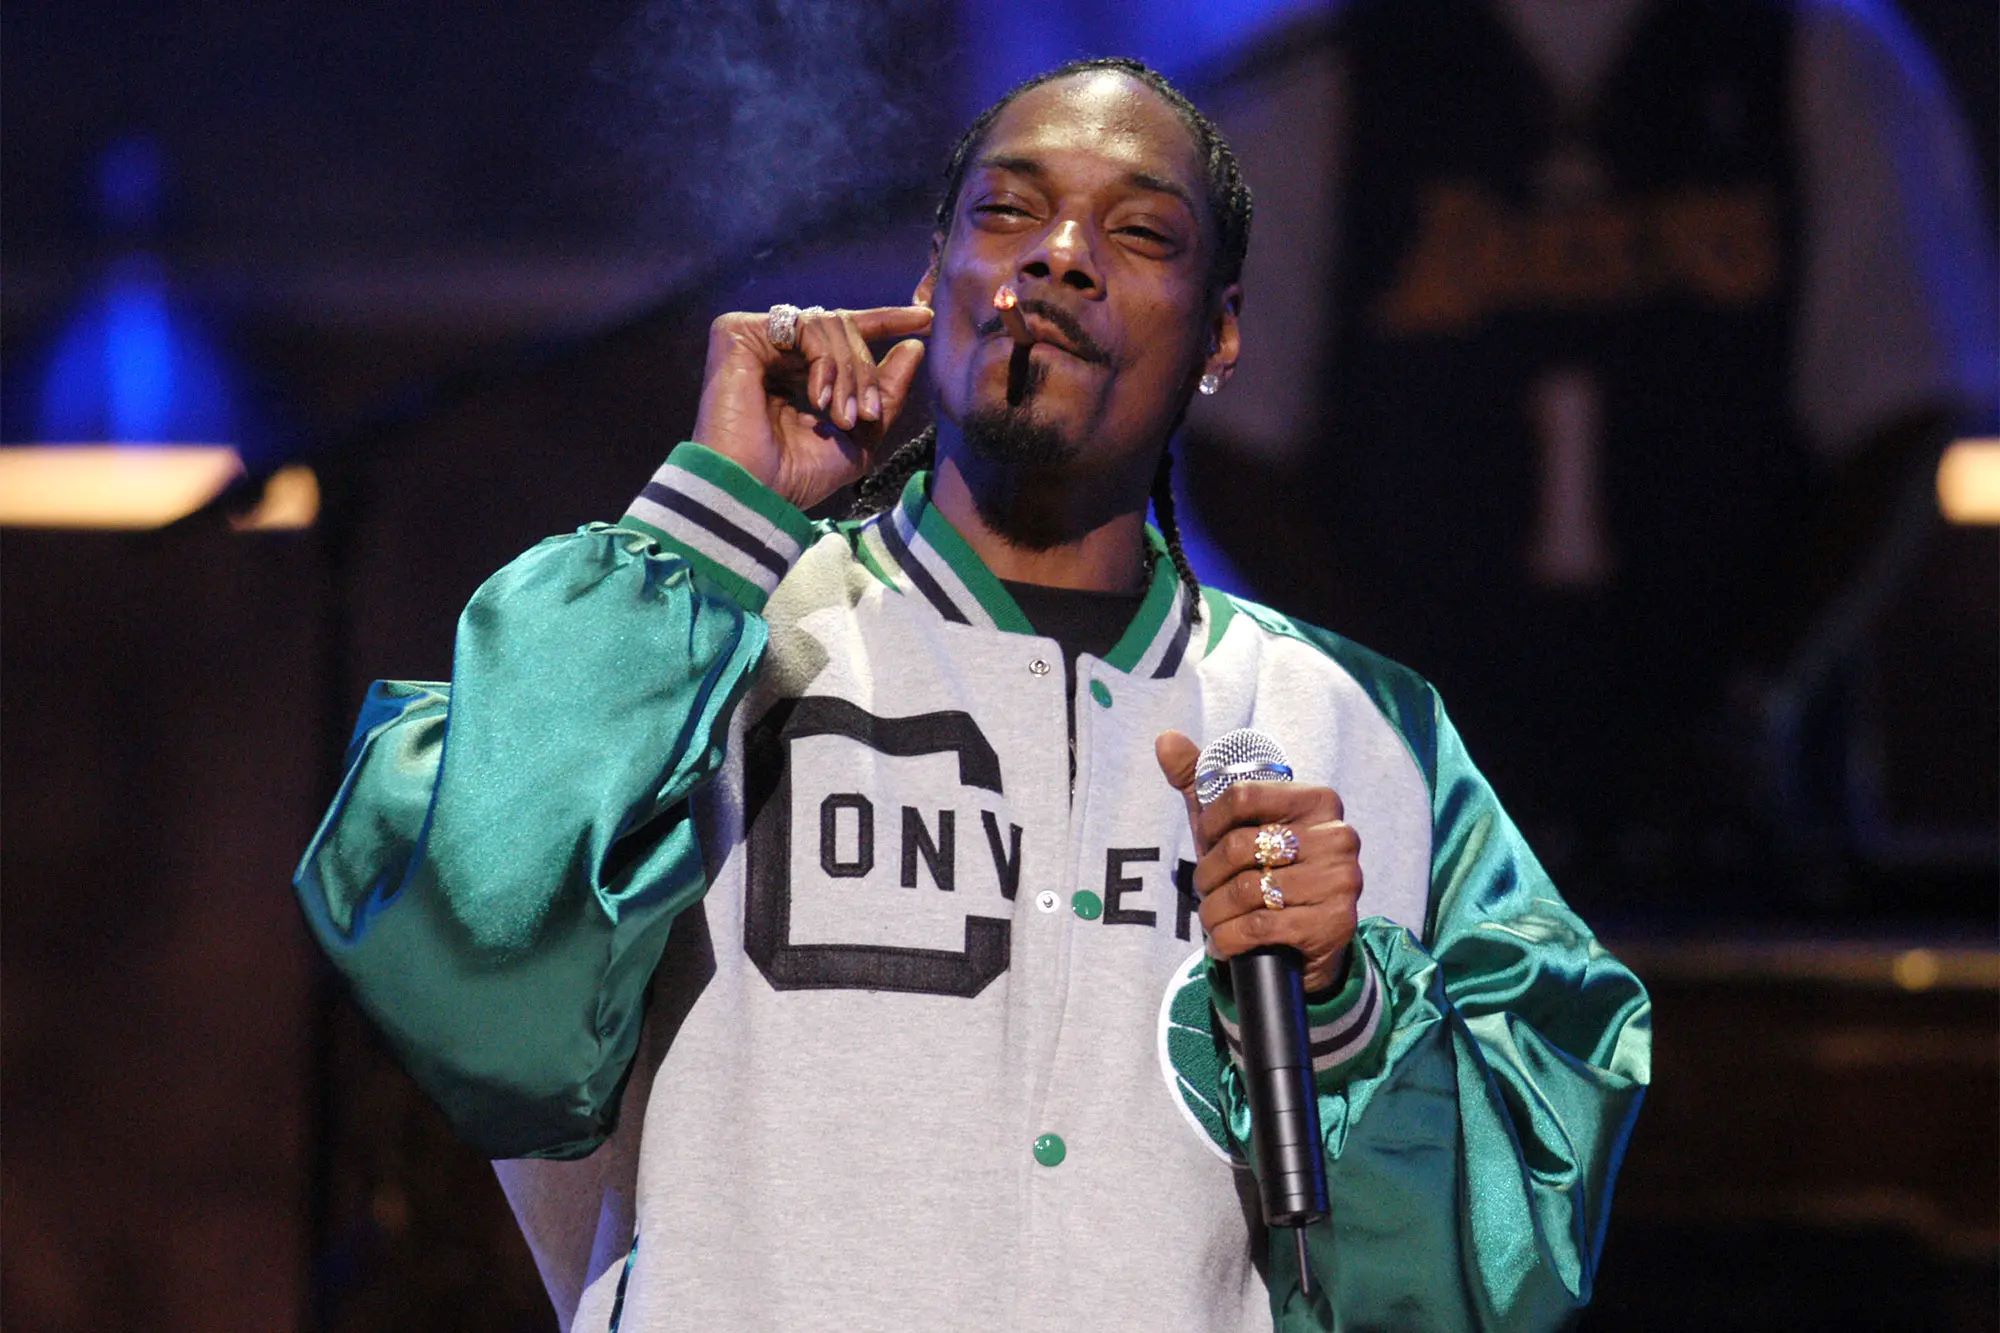 The Shocking Truth: Snoop Dogg's Secret Life As A Real Crip Revealed!